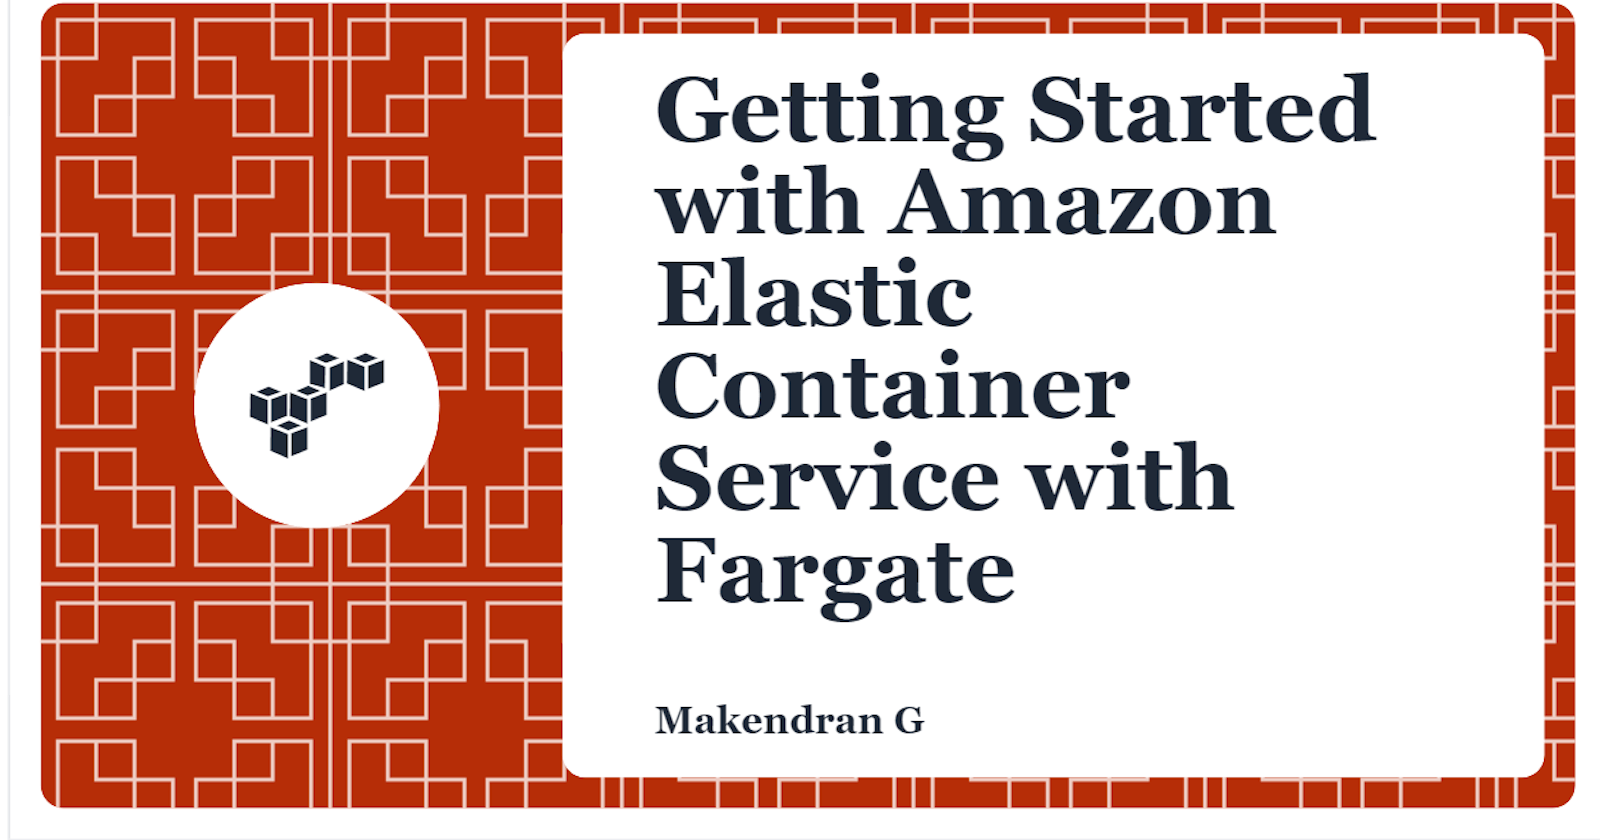 Getting Started with Amazon Elastic Container Service with Fargate